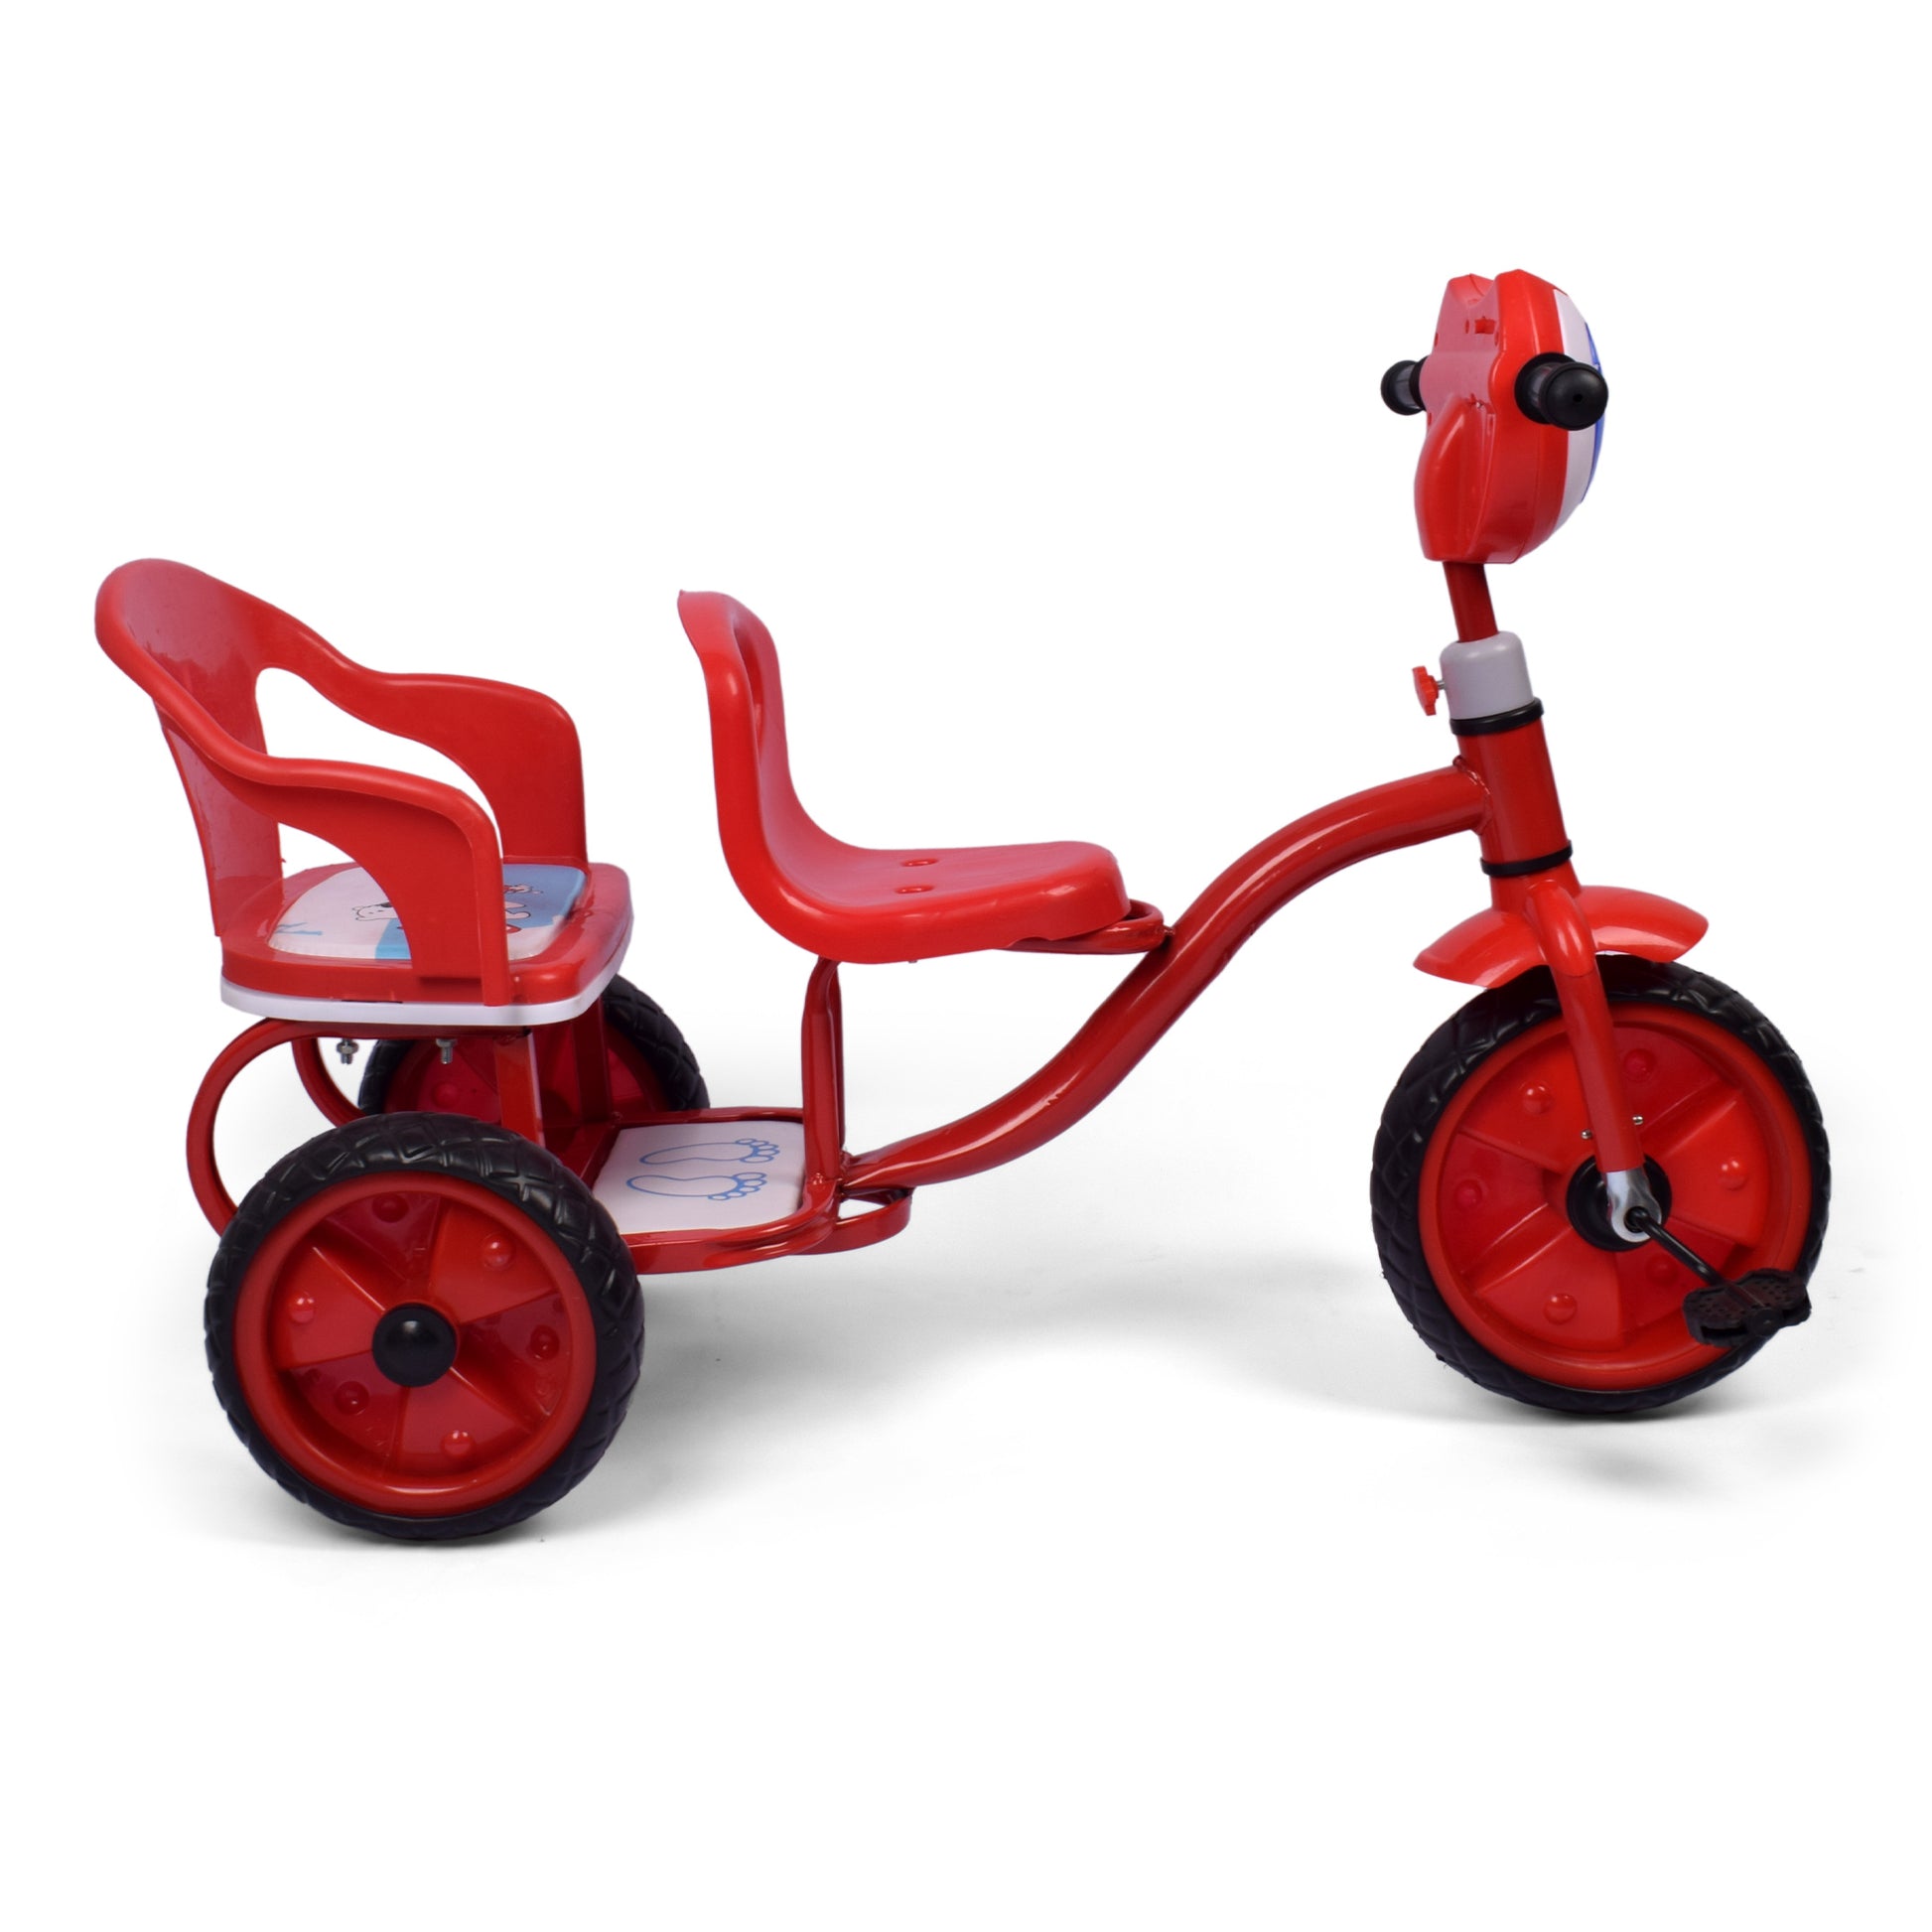 2 Kids Red Tricycle